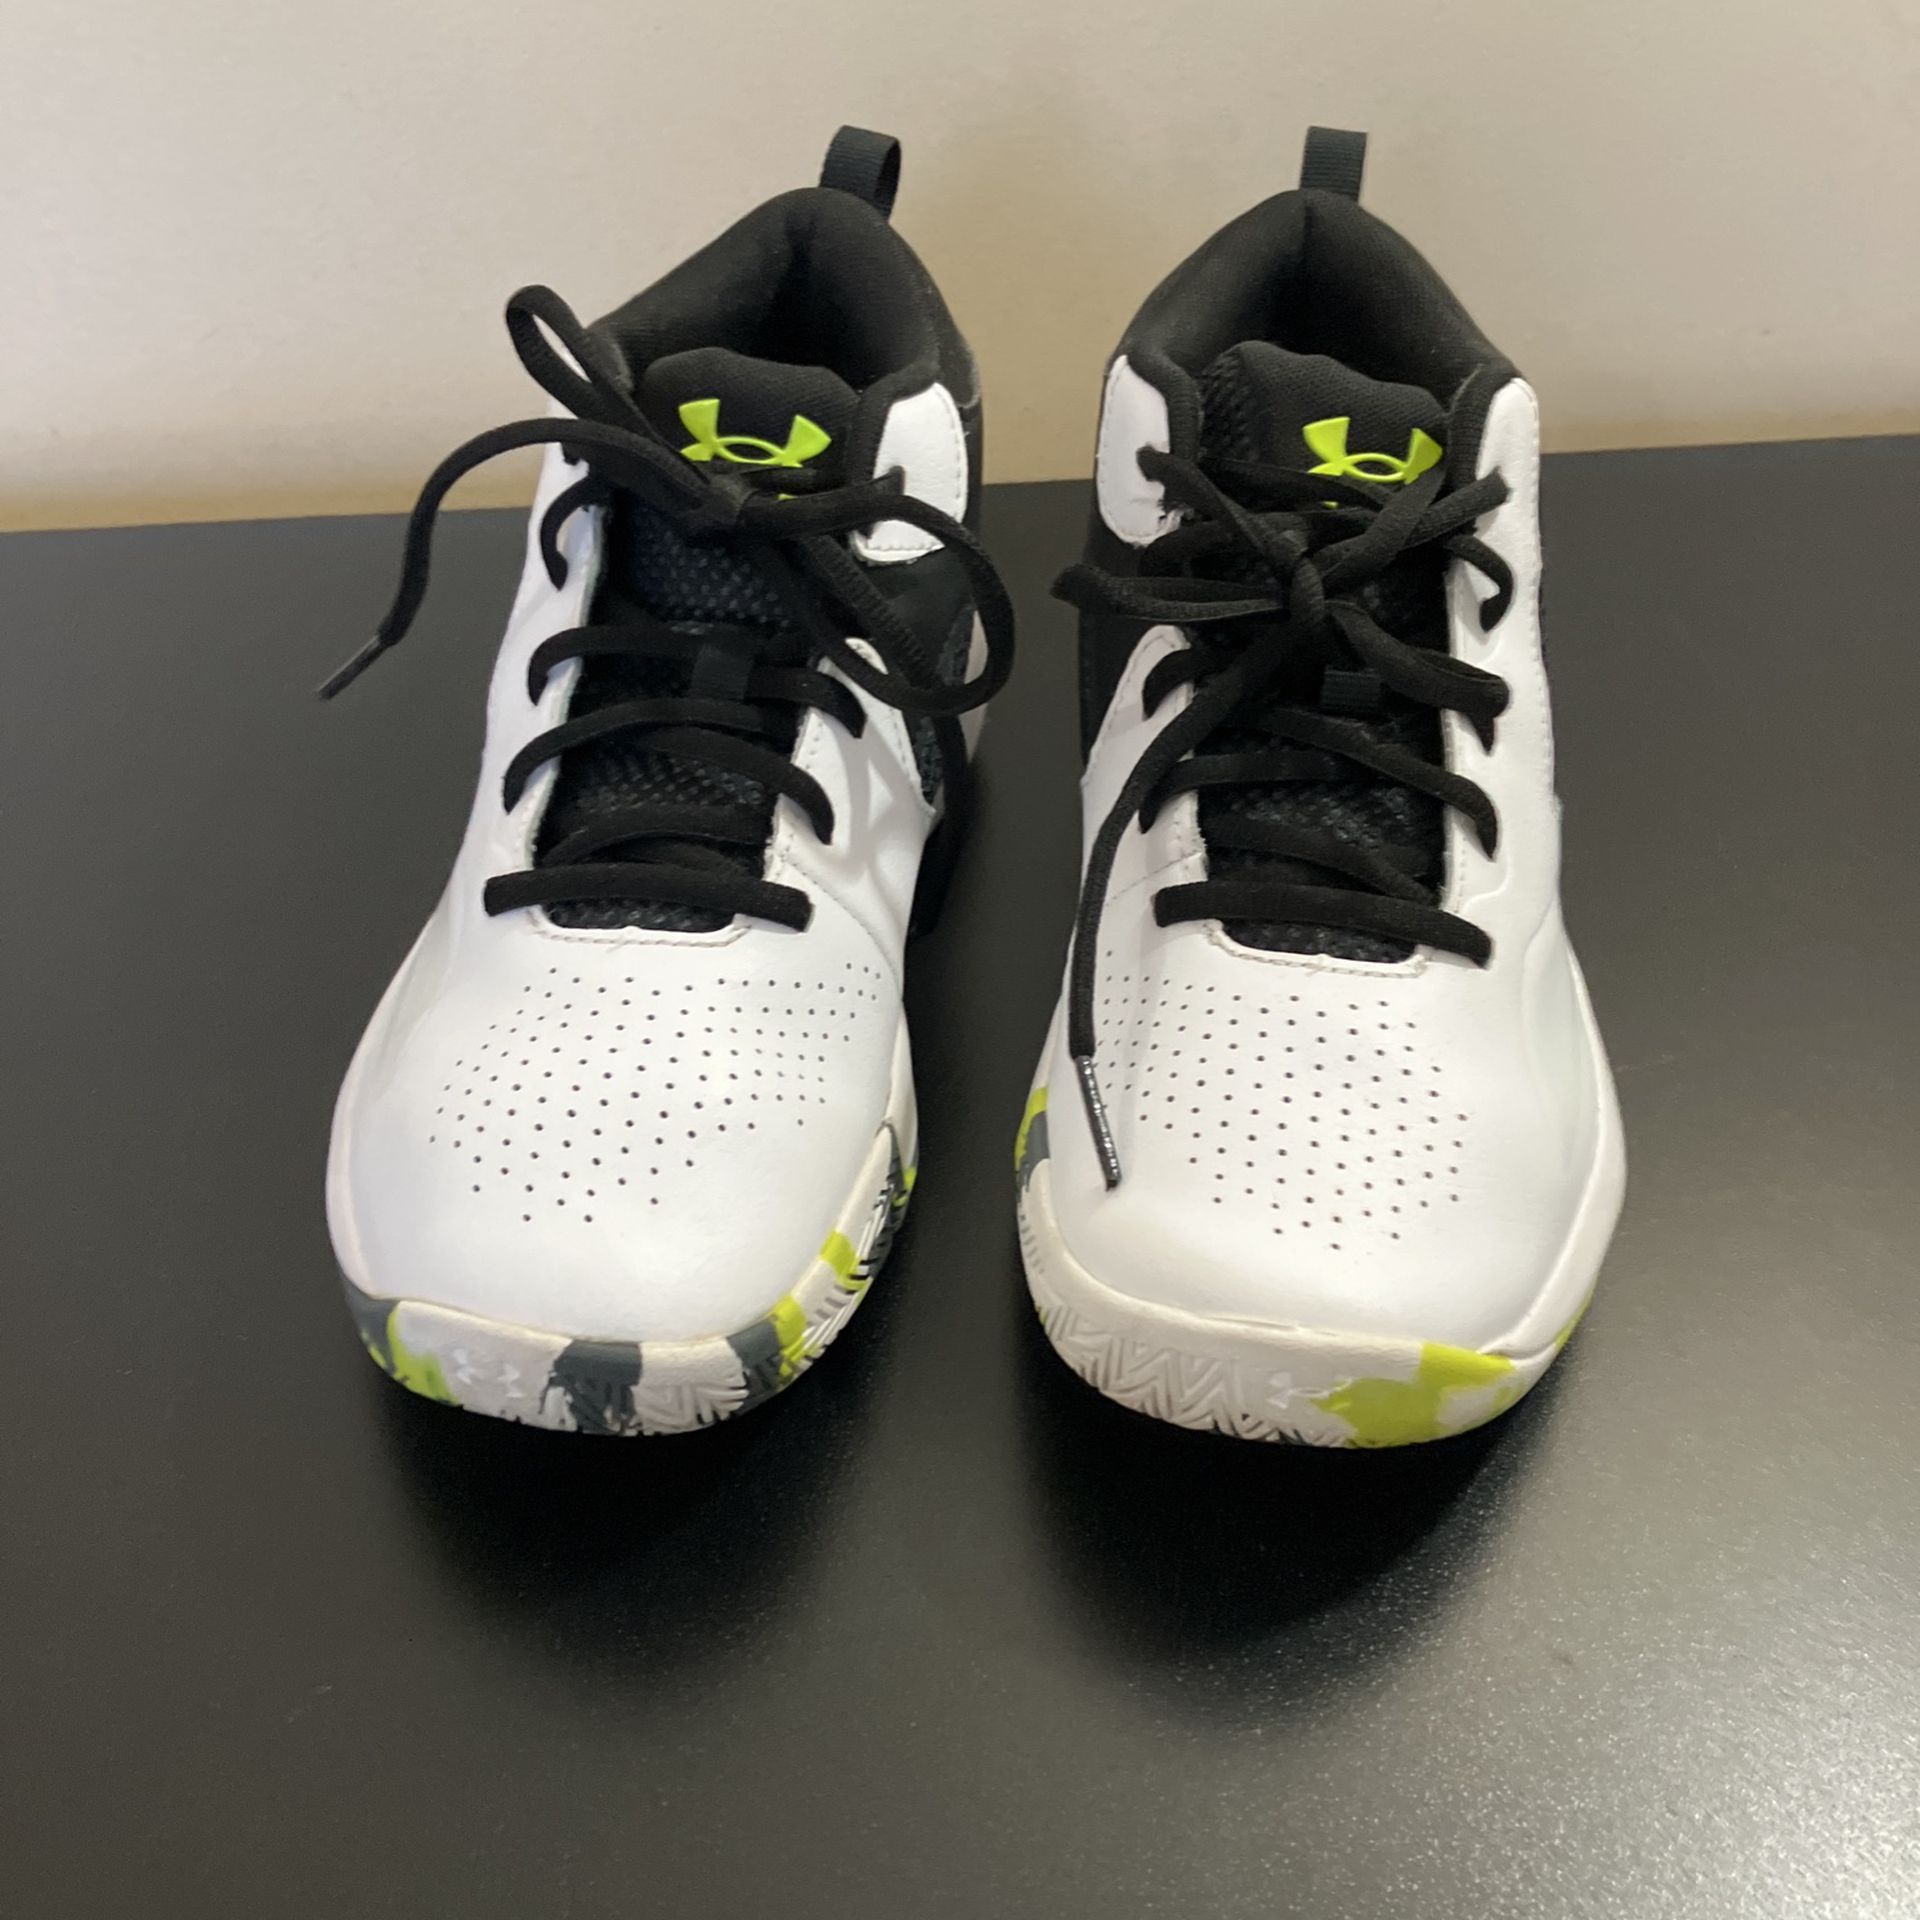 Boys (Youth) Under Armour Shoes Size 5.5Y